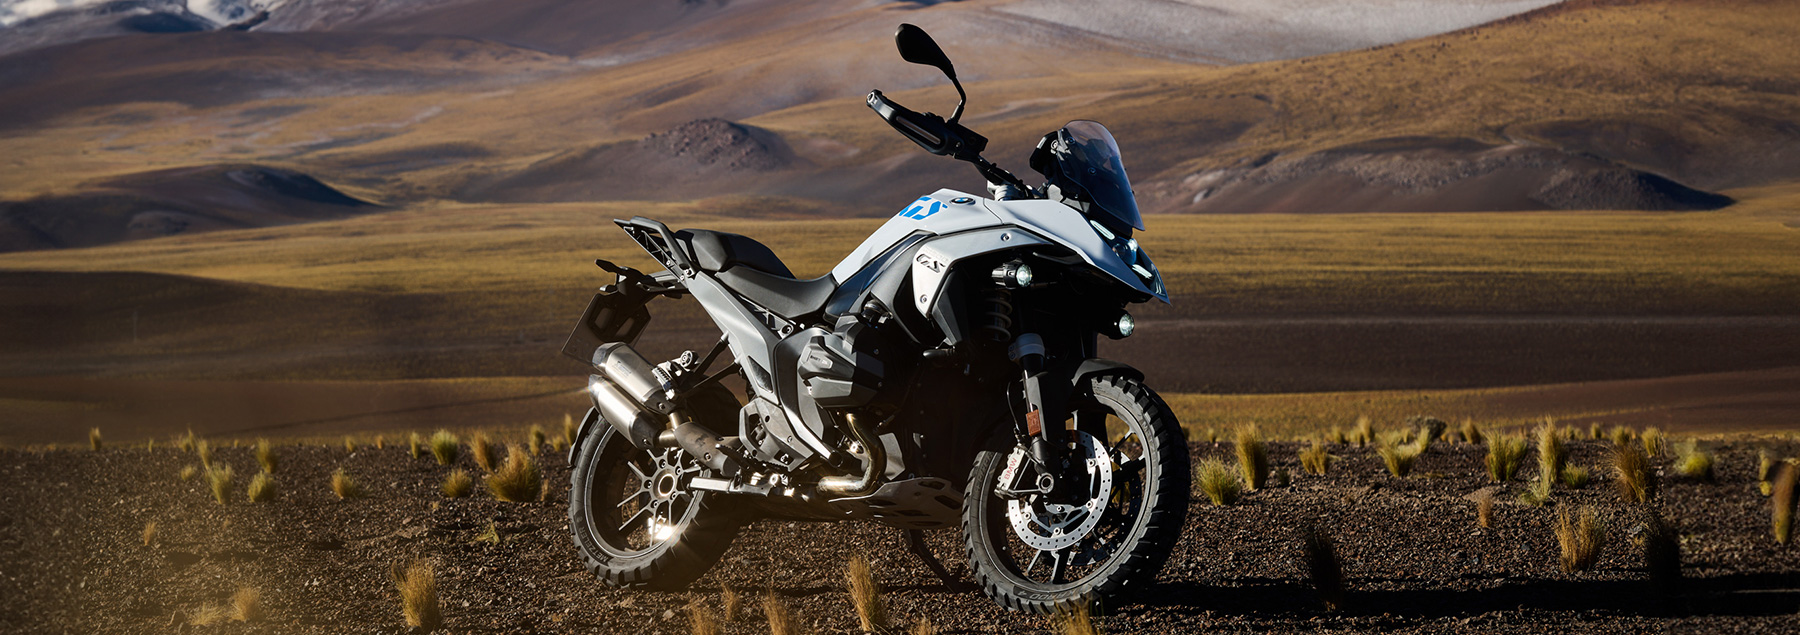 The BMW R 1300 GS sitting outdoors. 